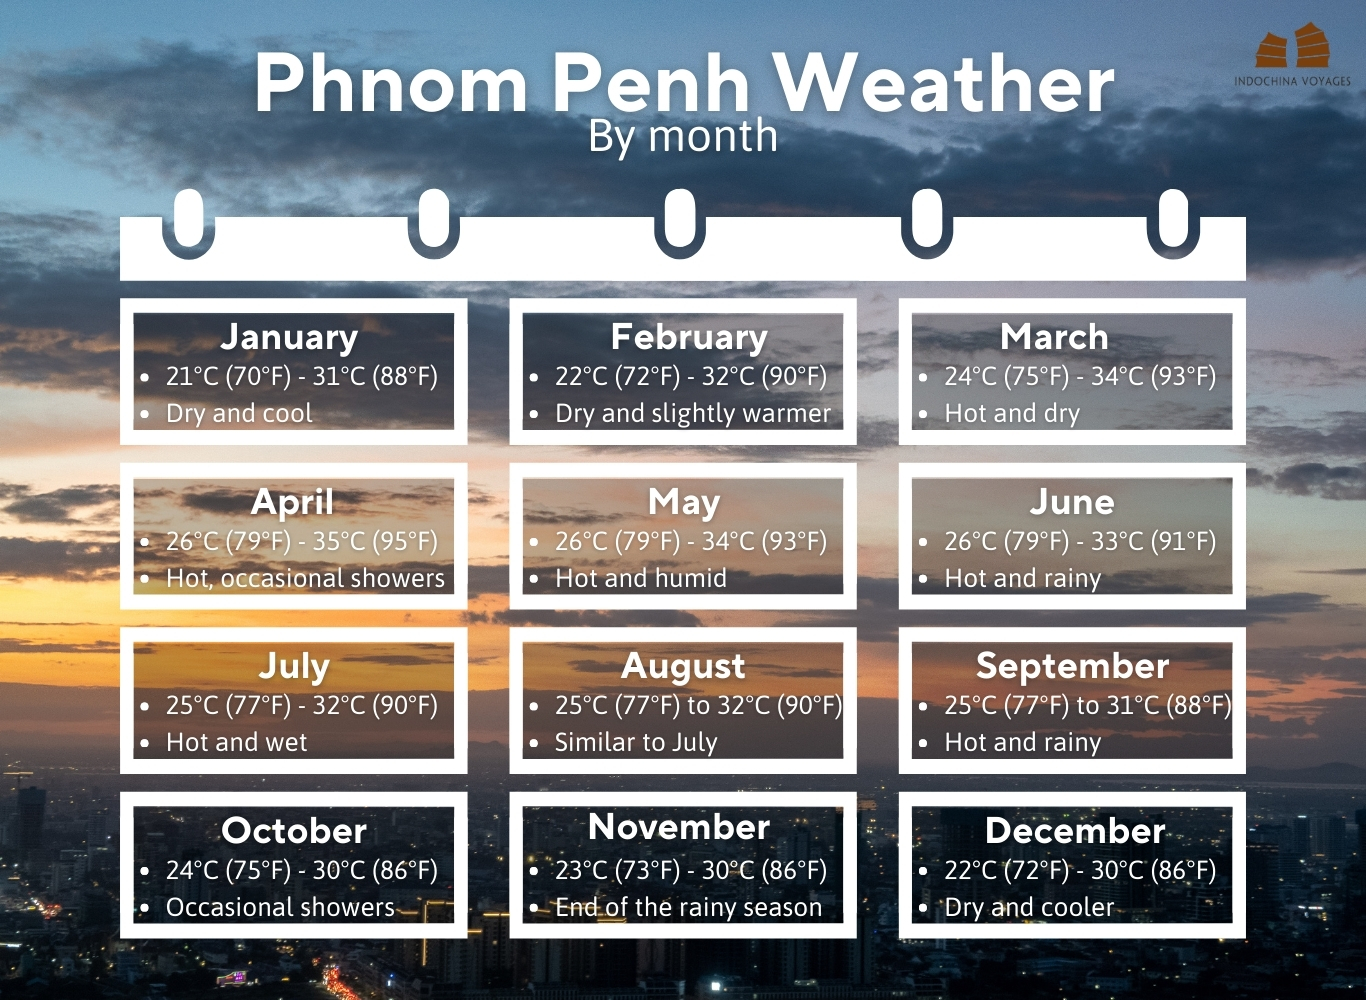 Phnom Penh weather by month